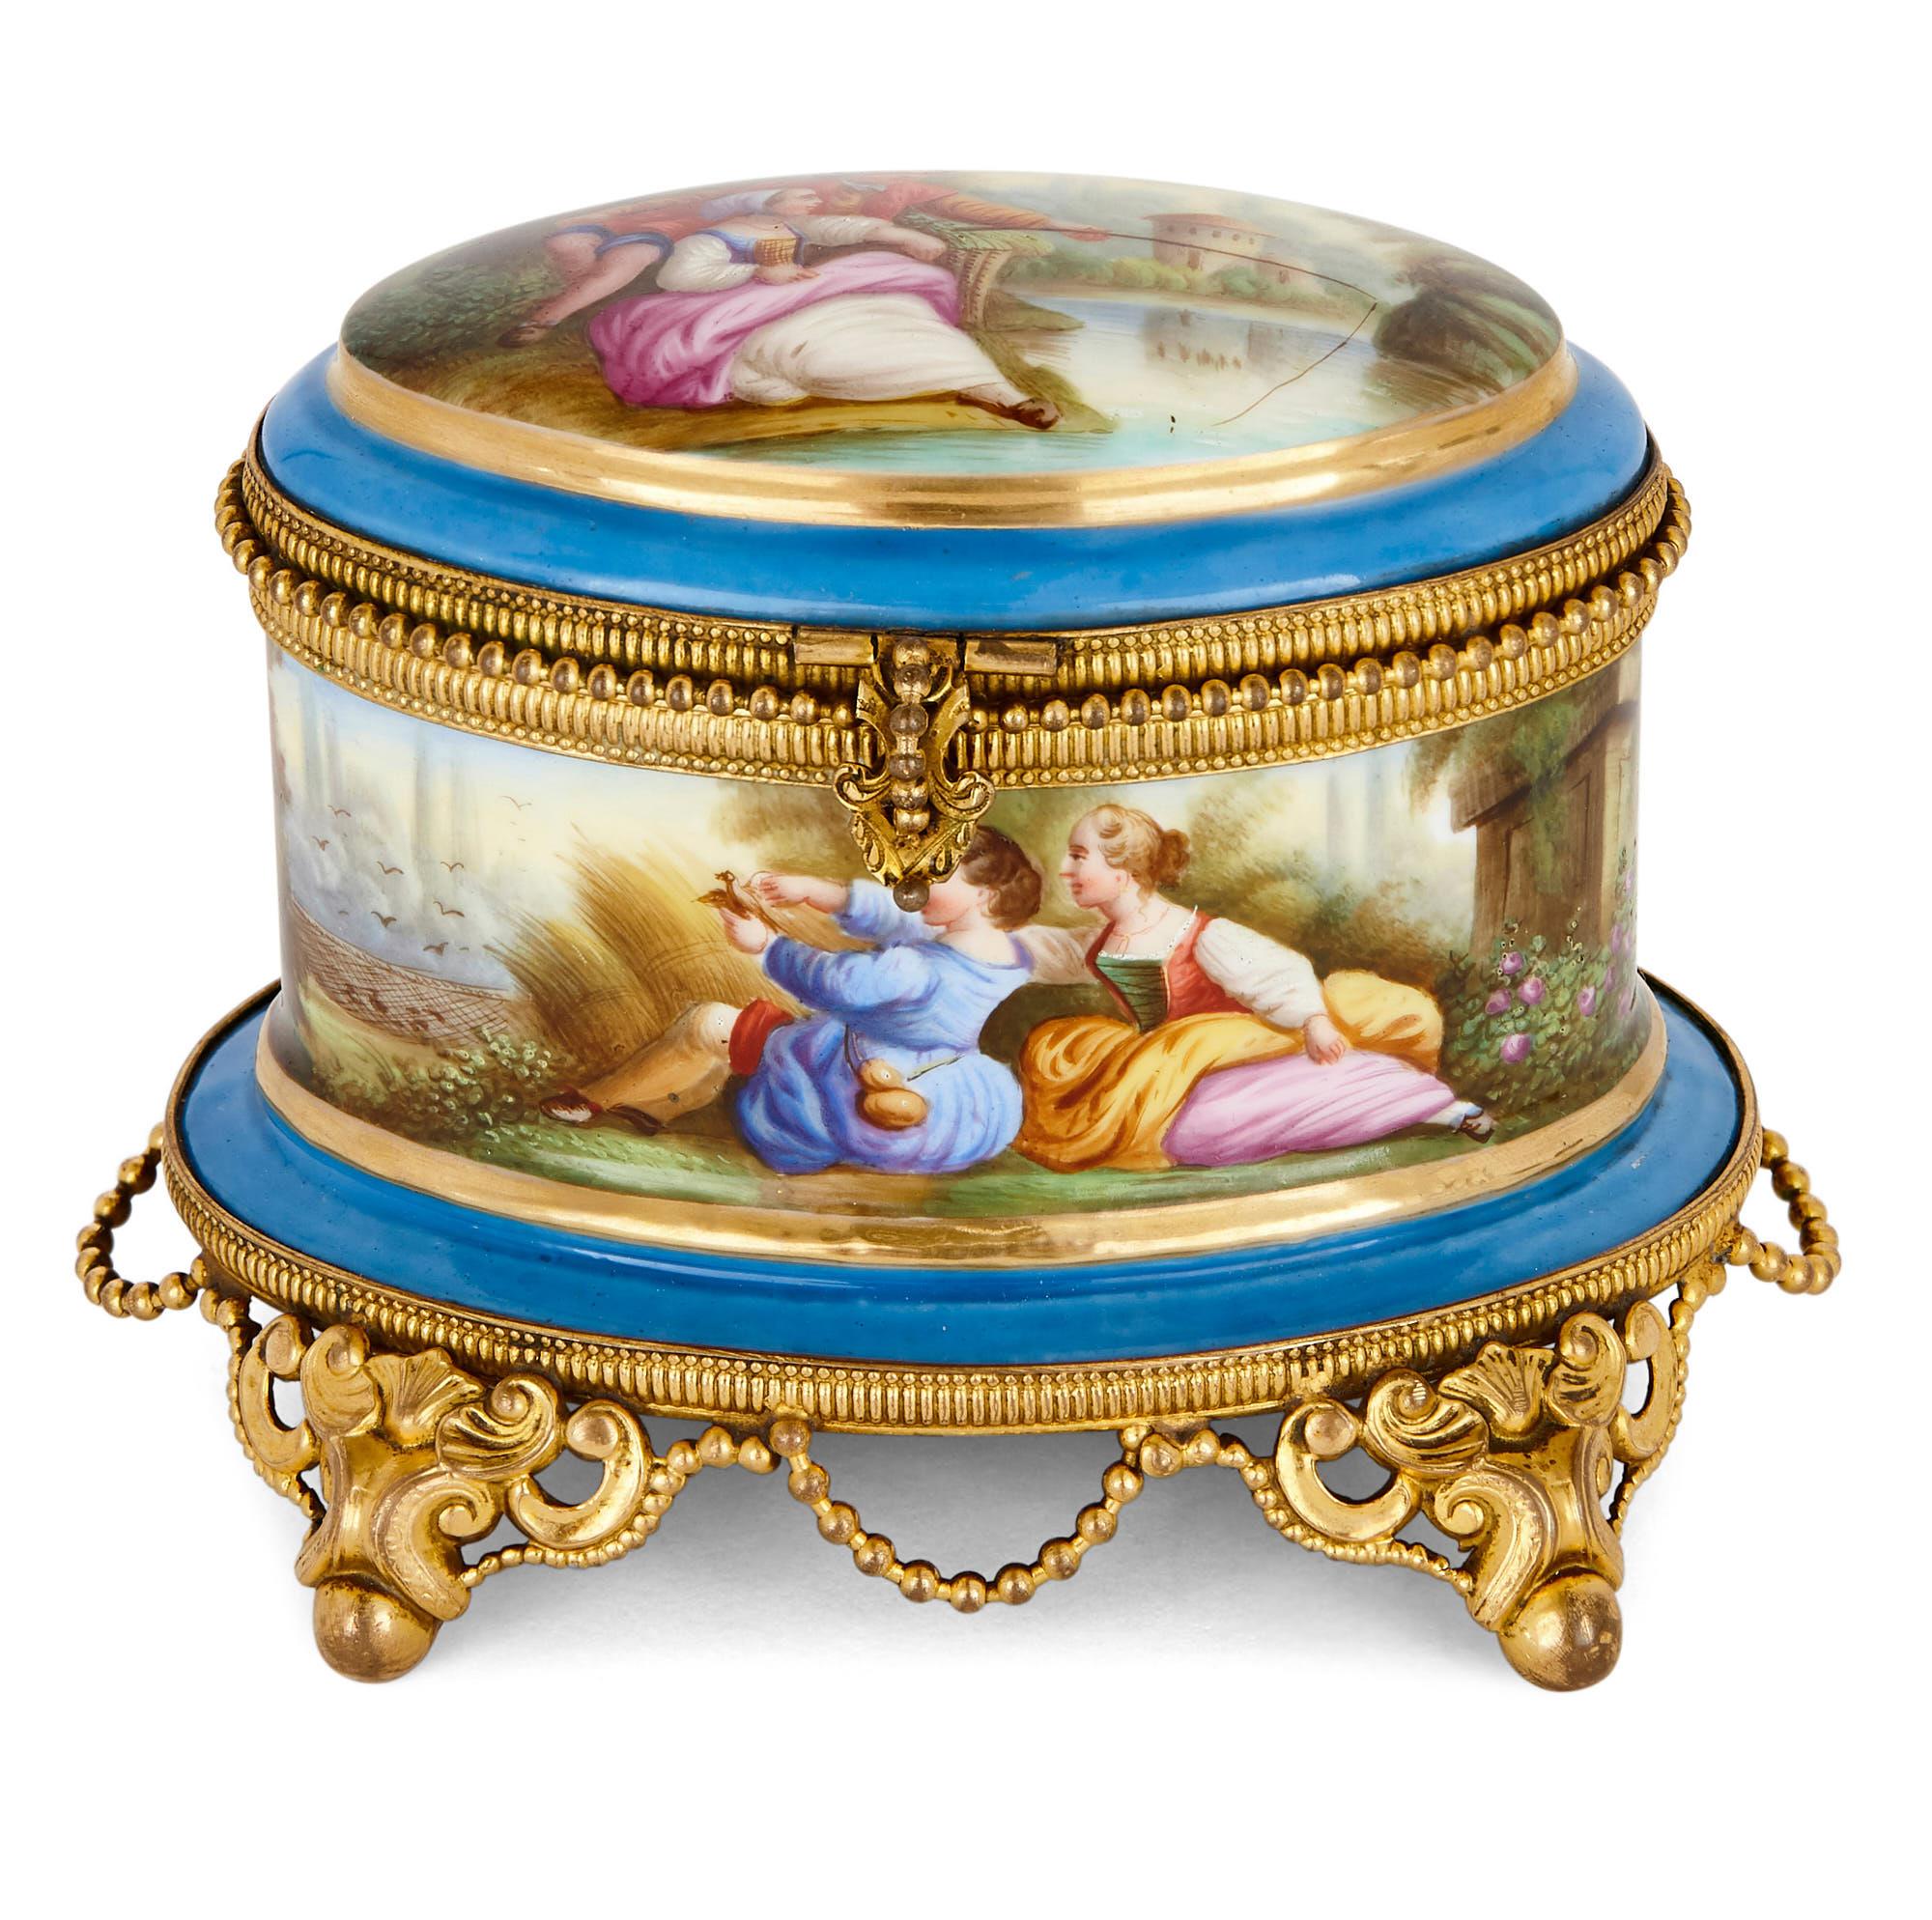 Of elliptical shape, this Sevres style porcelain perfume box contains fitted space for two glass perfume bottles. These bottles, which are mounted with gilt metal on their lids and around their necks, feature painted miniature scenes executed in